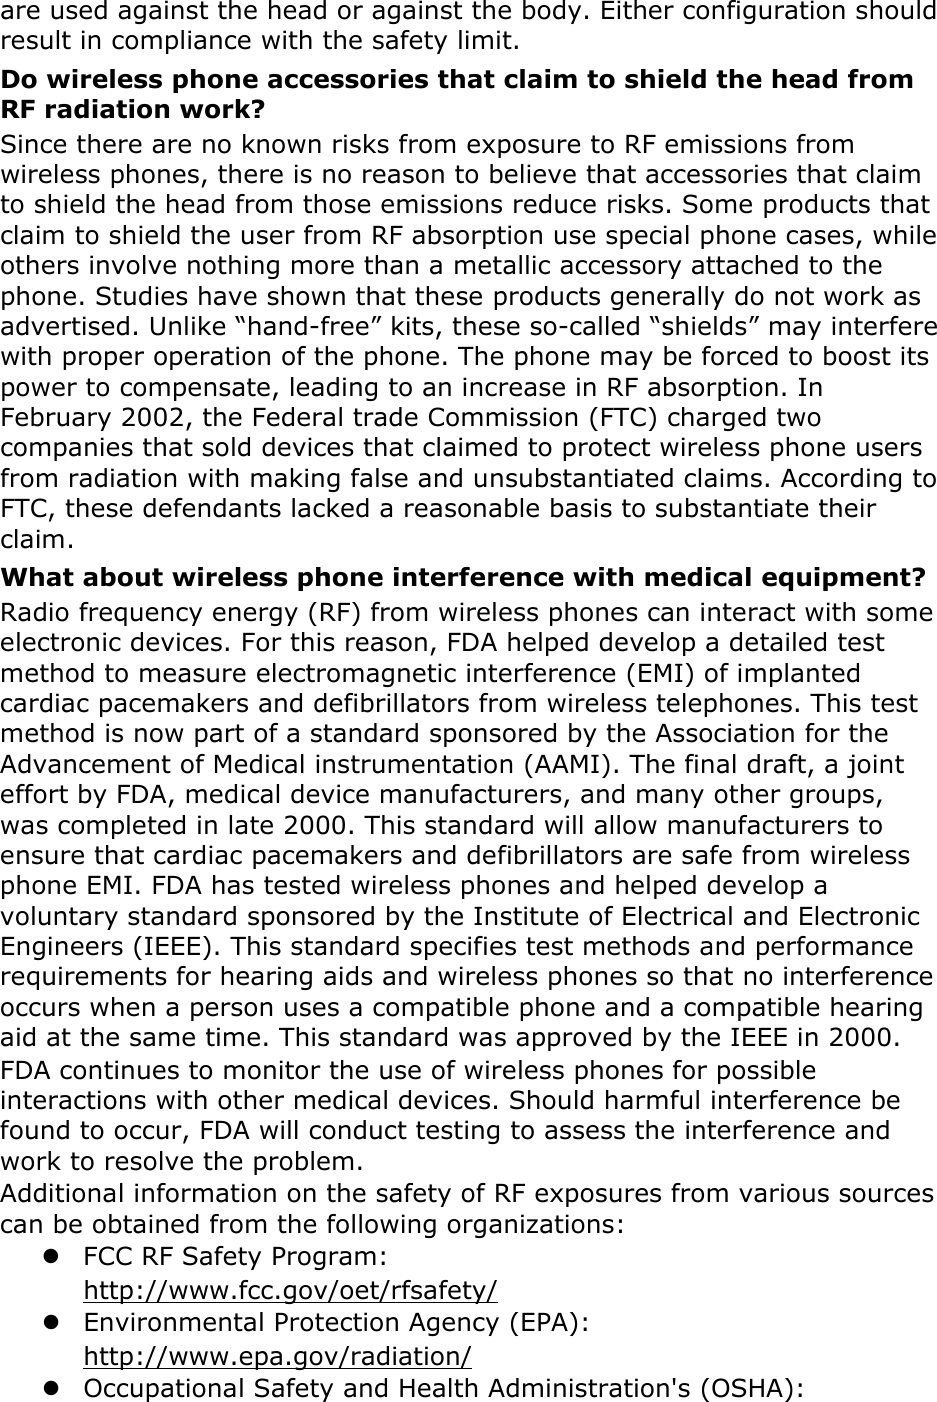 are used against the head or against the body. Either configuration should result in compliance with the safety limit. Do wireless phone accessories that claim to shield the head from RF radiation work? Since there are no known risks from exposure to RF emissions from wireless phones, there is no reason to believe that accessories that claim to shield the head from those emissions reduce risks. Some products that claim to shield the user from RF absorption use special phone cases, while others involve nothing more than a metallic accessory attached to the phone. Studies have shown that these products generally do not work as advertised. Unlike “hand-free” kits, these so-called “shields” may interfere with proper operation of the phone. The phone may be forced to boost its power to compensate, leading to an increase in RF absorption. In February 2002, the Federal trade Commission (FTC) charged two companies that sold devices that claimed to protect wireless phone users from radiation with making false and unsubstantiated claims. According to FTC, these defendants lacked a reasonable basis to substantiate their claim. What about wireless phone interference with medical equipment? Radio frequency energy (RF) from wireless phones can interact with some electronic devices. For this reason, FDA helped develop a detailed test method to measure electromagnetic interference (EMI) of implanted cardiac pacemakers and defibrillators from wireless telephones. This test method is now part of a standard sponsored by the Association for the Advancement of Medical instrumentation (AAMI). The final draft, a joint effort by FDA, medical device manufacturers, and many other groups, was completed in late 2000. This standard will allow manufacturers to ensure that cardiac pacemakers and defibrillators are safe from wireless phone EMI. FDA has tested wireless phones and helped develop a voluntary standard sponsored by the Institute of Electrical and Electronic Engineers (IEEE). This standard specifies test methods and performance requirements for hearing aids and wireless phones so that no interference occurs when a person uses a compatible phone and a compatible hearing aid at the same time. This standard was approved by the IEEE in 2000. FDA continues to monitor the use of wireless phones for possible interactions with other medical devices. Should harmful interference be found to occur, FDA will conduct testing to assess the interference and work to resolve the problem. Additional information on the safety of RF exposures from various sources can be obtained from the following organizations:  FCC RF Safety Program:  http://www.fcc.gov/oet/rfsafety/  Environmental Protection Agency (EPA):  http://www.epa.gov/radiation/  Occupational Safety and Health Administration&apos;s (OSHA):   